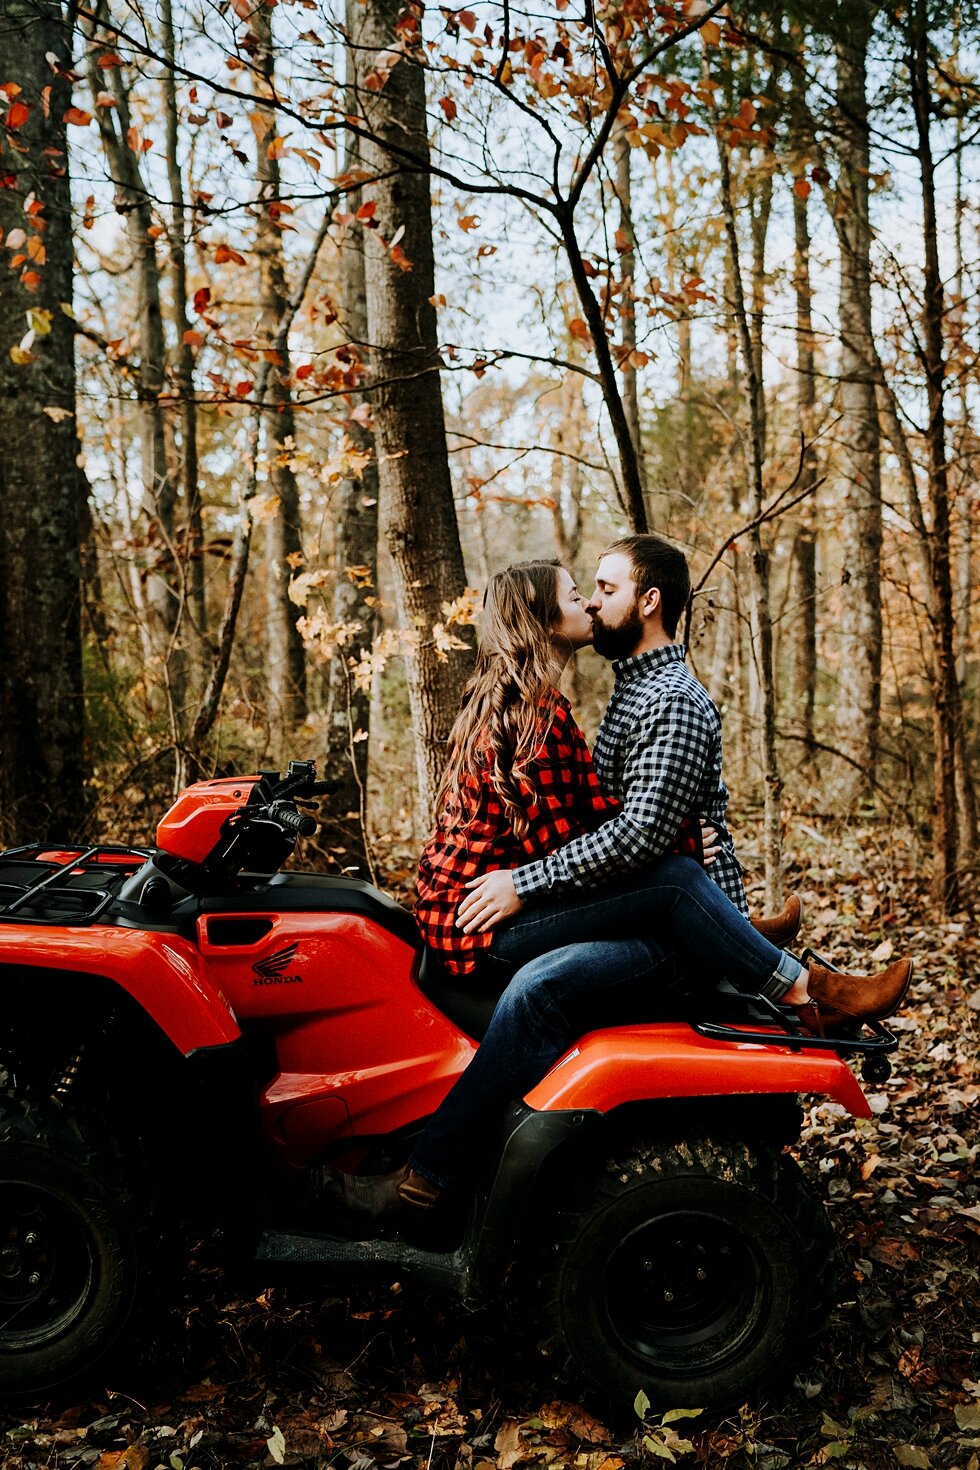  Kissing on the back of a four wheeler, this engaged couple could not be more in love! #engagementgoals #engagementphotographer #engaged #outdoorengagement #kentuckyphotographer #indianaphotographer #louisvillephotographer #engagementphotos #savethed